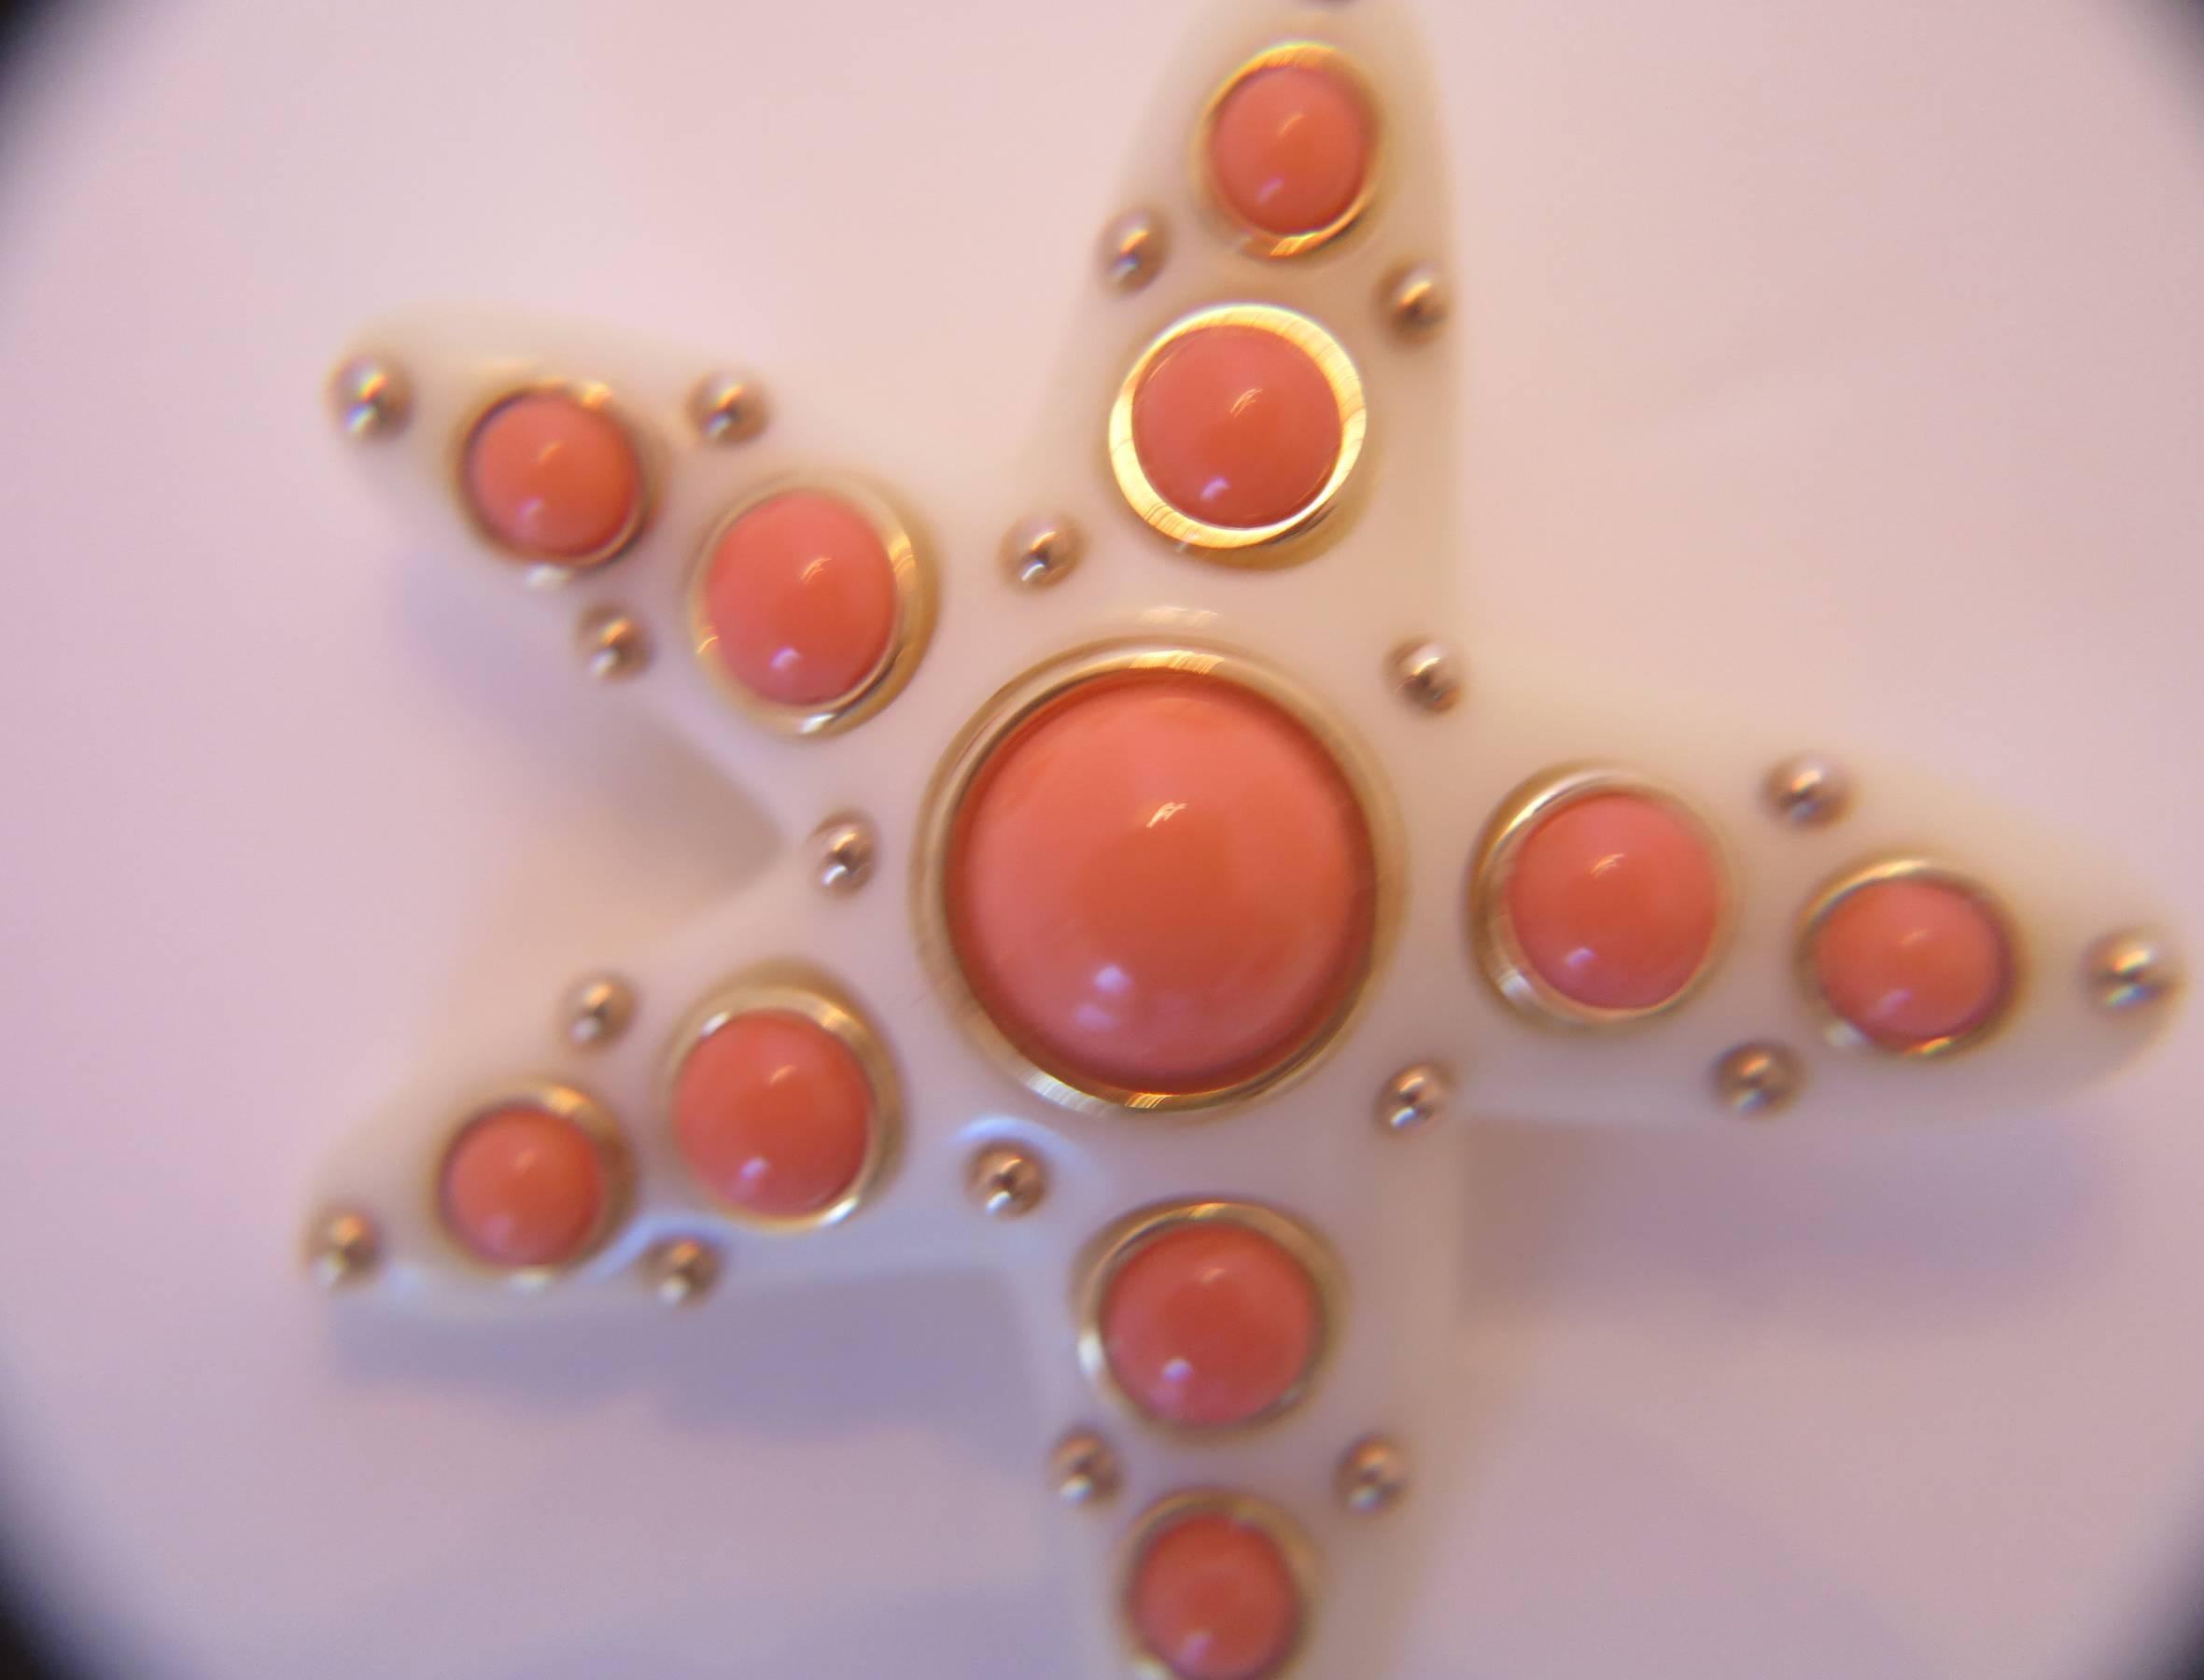 K.J.L. Faux ivory & coral cabochon starfish pin Kenneth J Lane...Creamy ivory perspex with gold metal bezel set faux coral cabochons...Looks barely if ever worn...
Measurements:
approx. 2 1/2